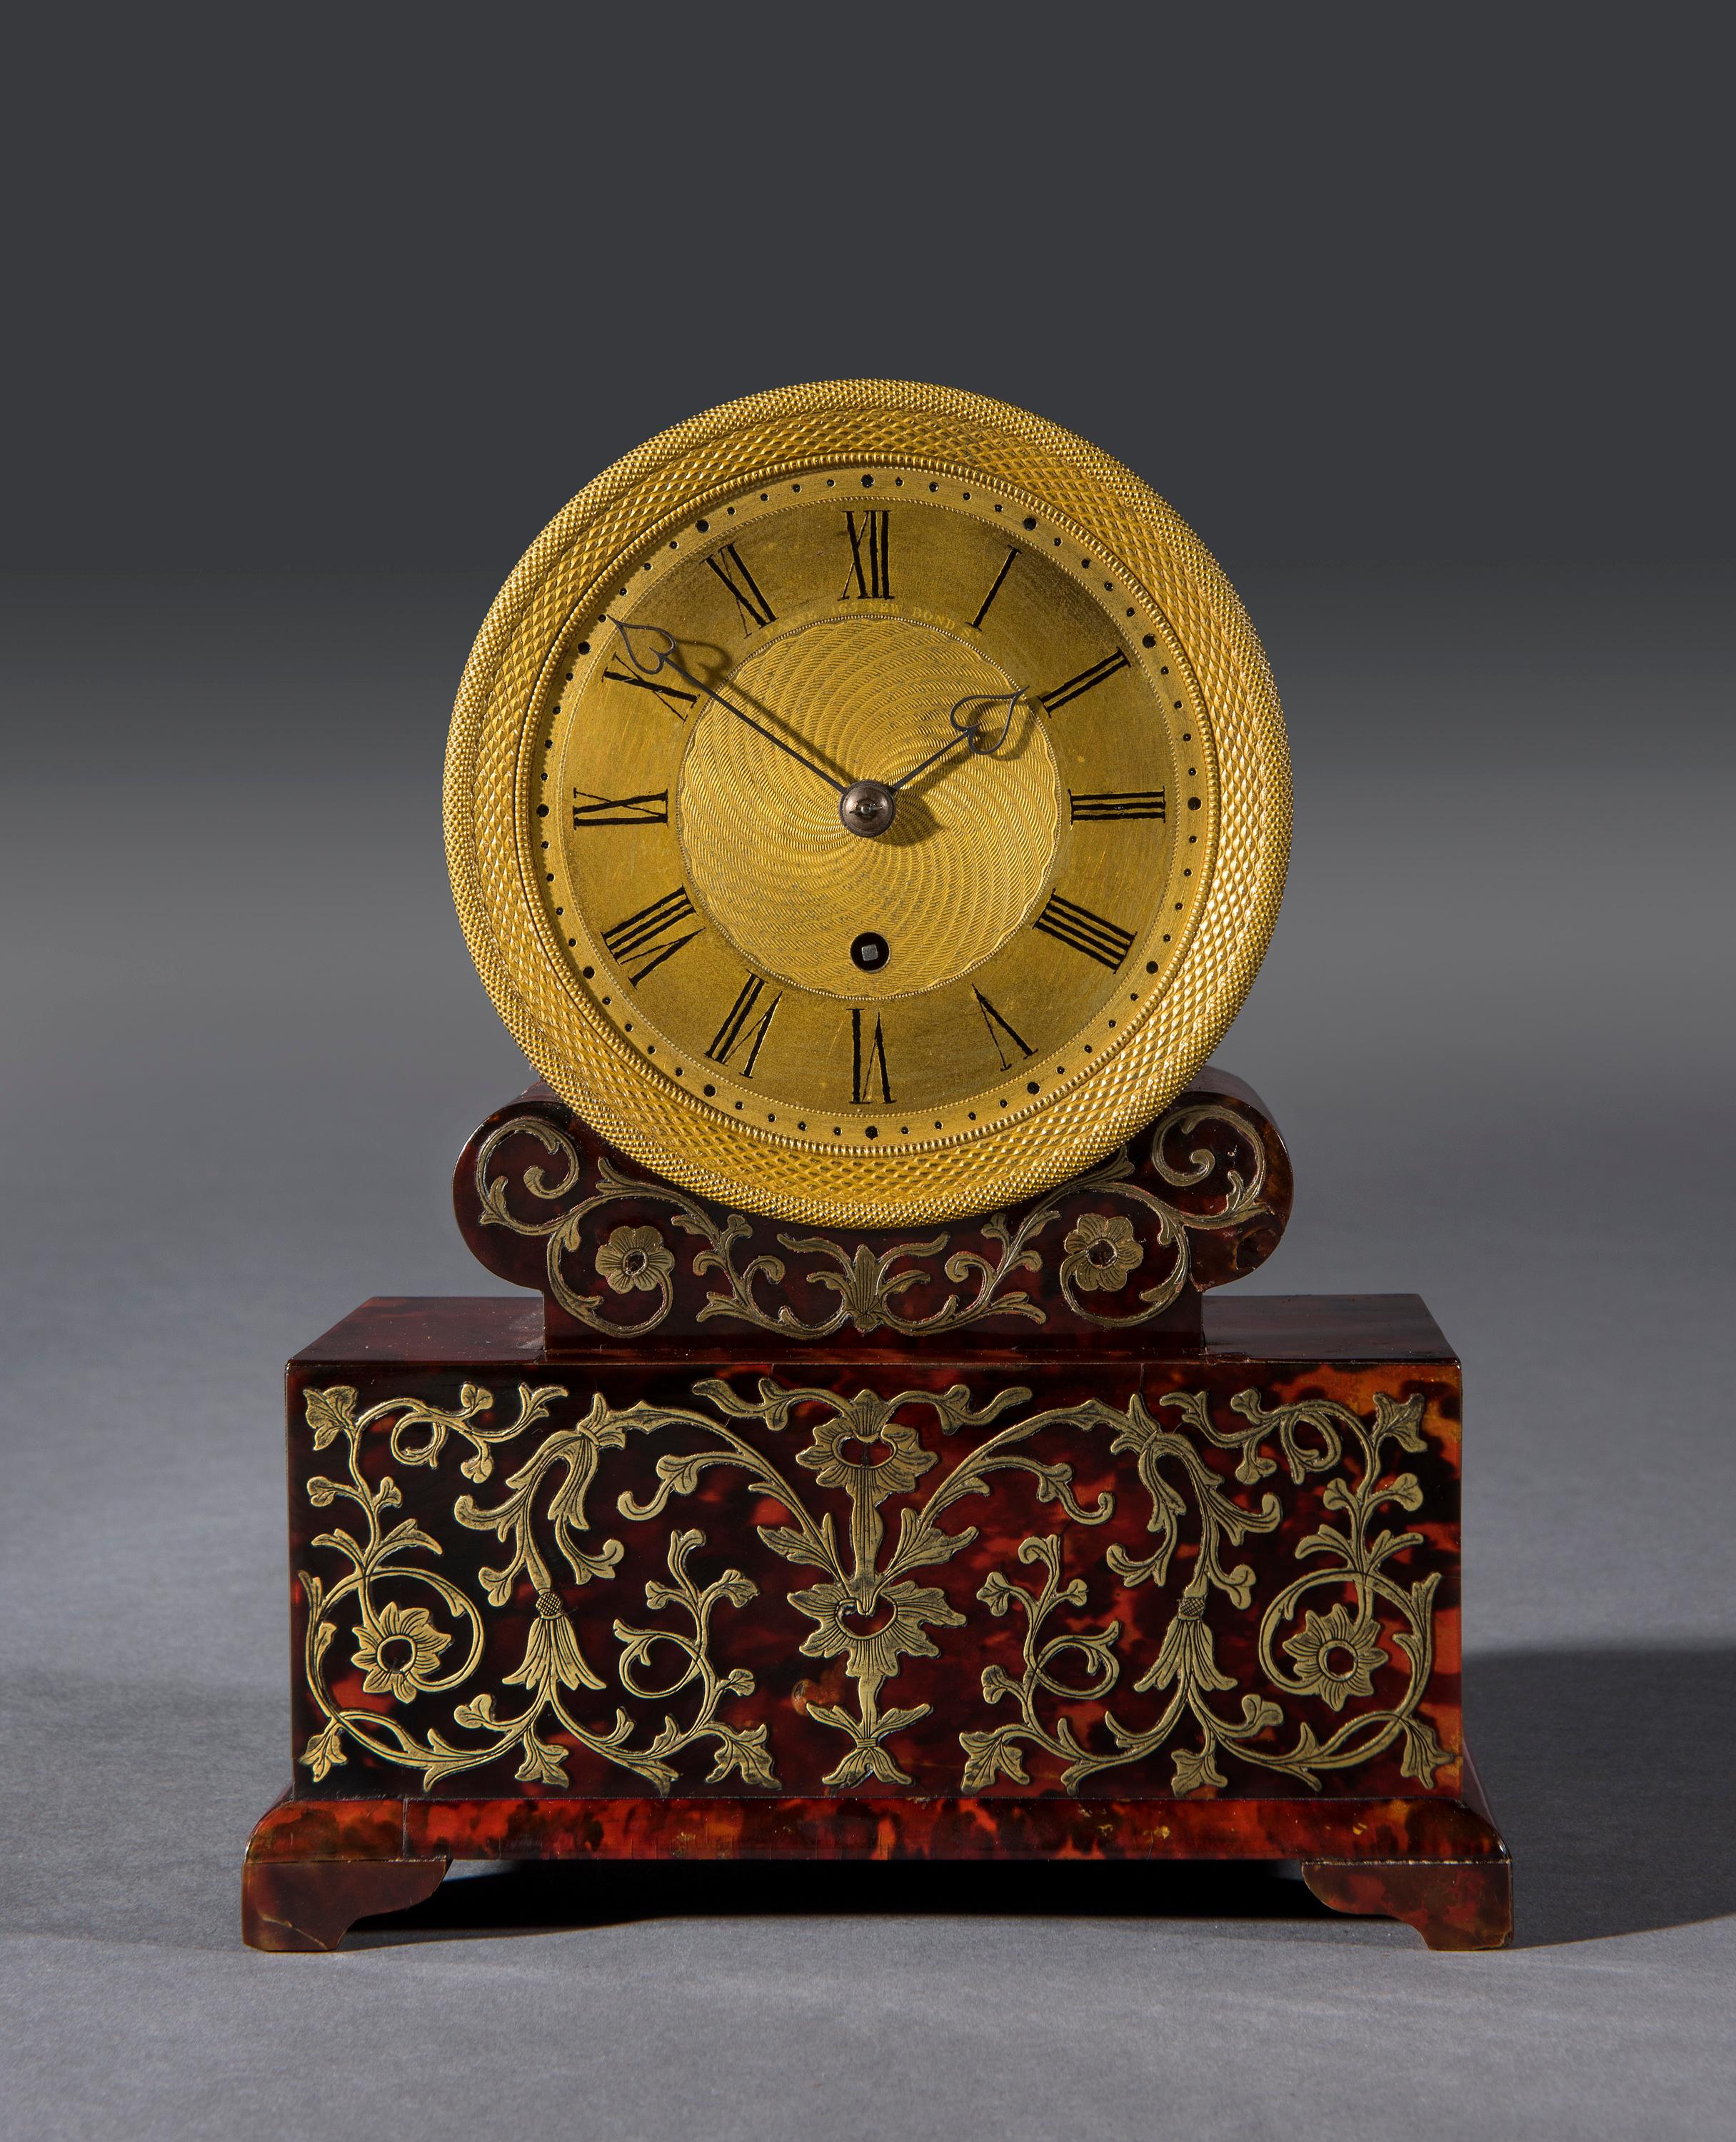 The marquetry inlaid boulle drumhead clock is veneered in red tortoiseshell with a finely gilt cast and etched dial with Roman numerals and heart-shaped arms. The back of the clock is veneered in rosewood and engraved with the clockmaker's name,